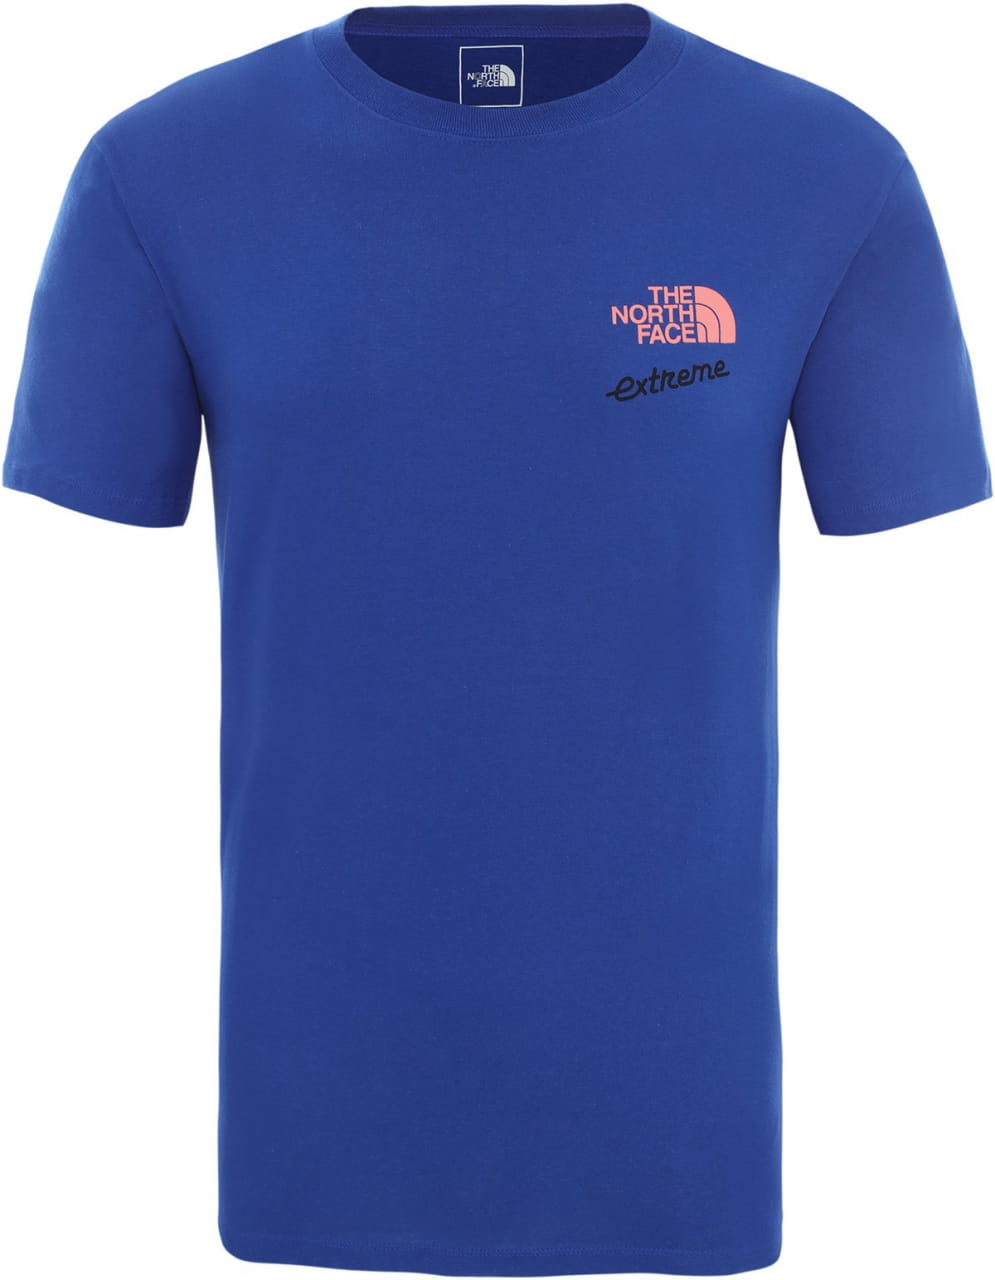 T-Shirts The North Face Men's Extreme T-Shirt